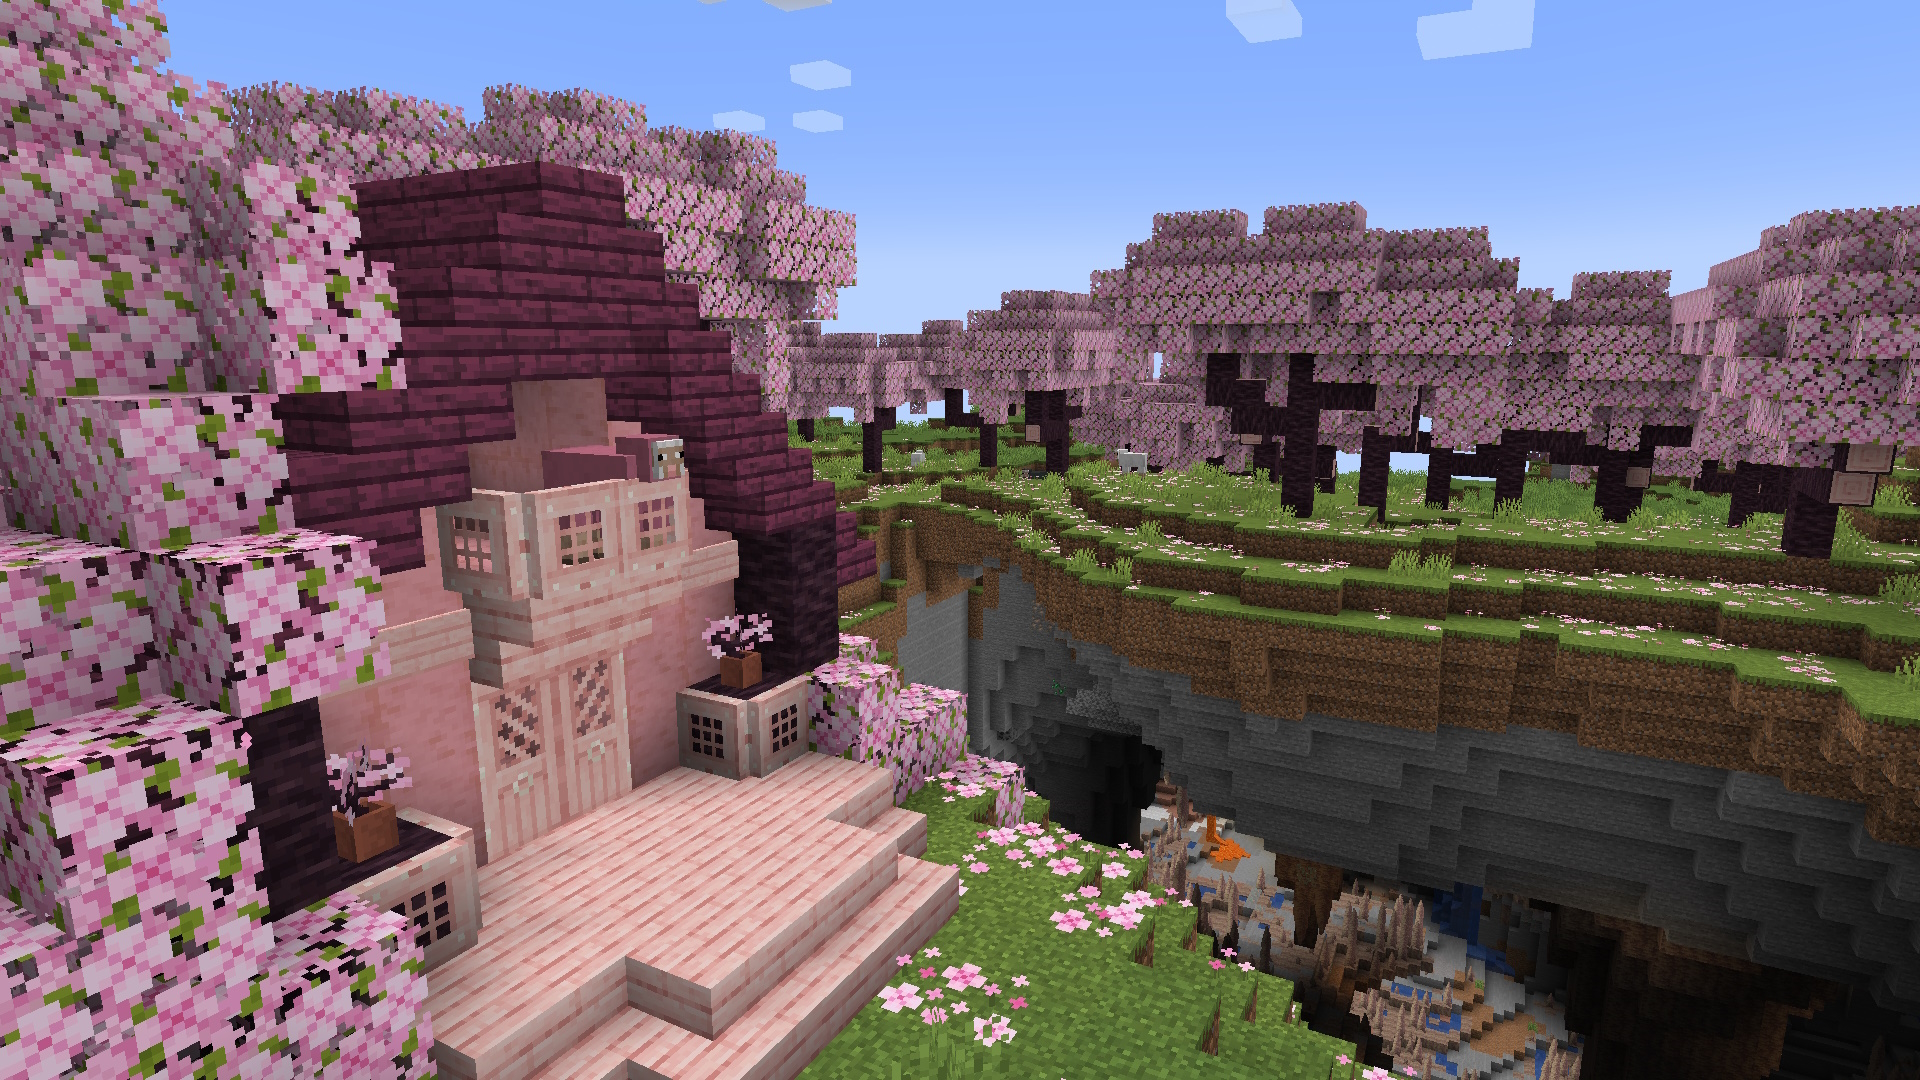 Minecraft's 1.20 Trails And Tales Update Is Out Now - GameSpot